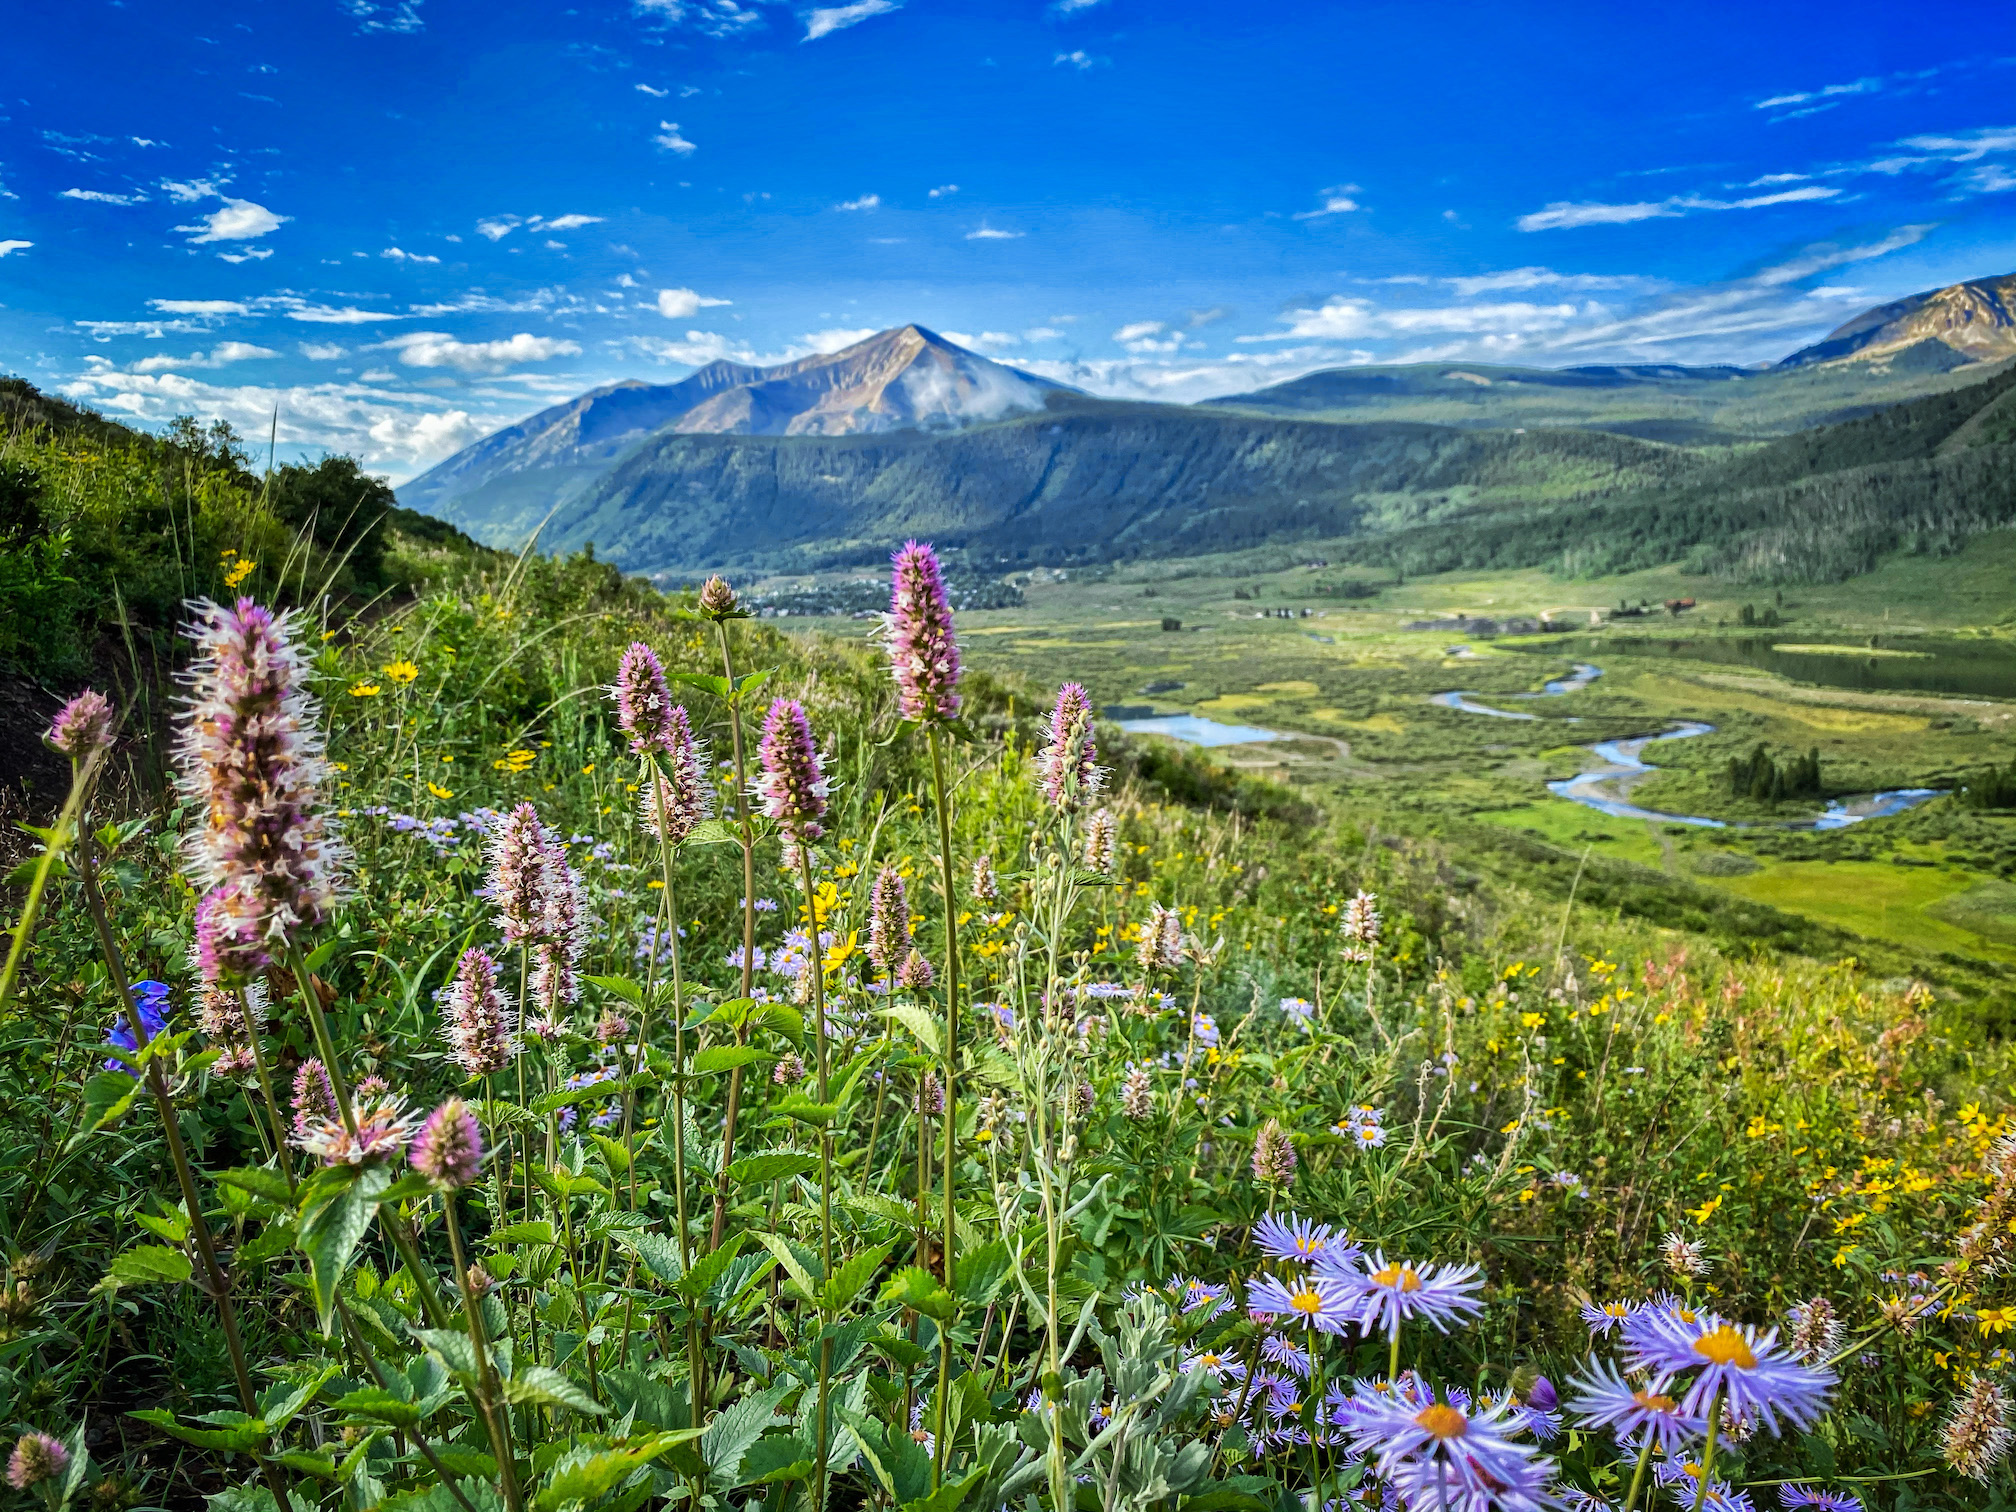 whetstone mountain in crested butte. Wildflowers dot the landscape and a mountain peak hovers in the background